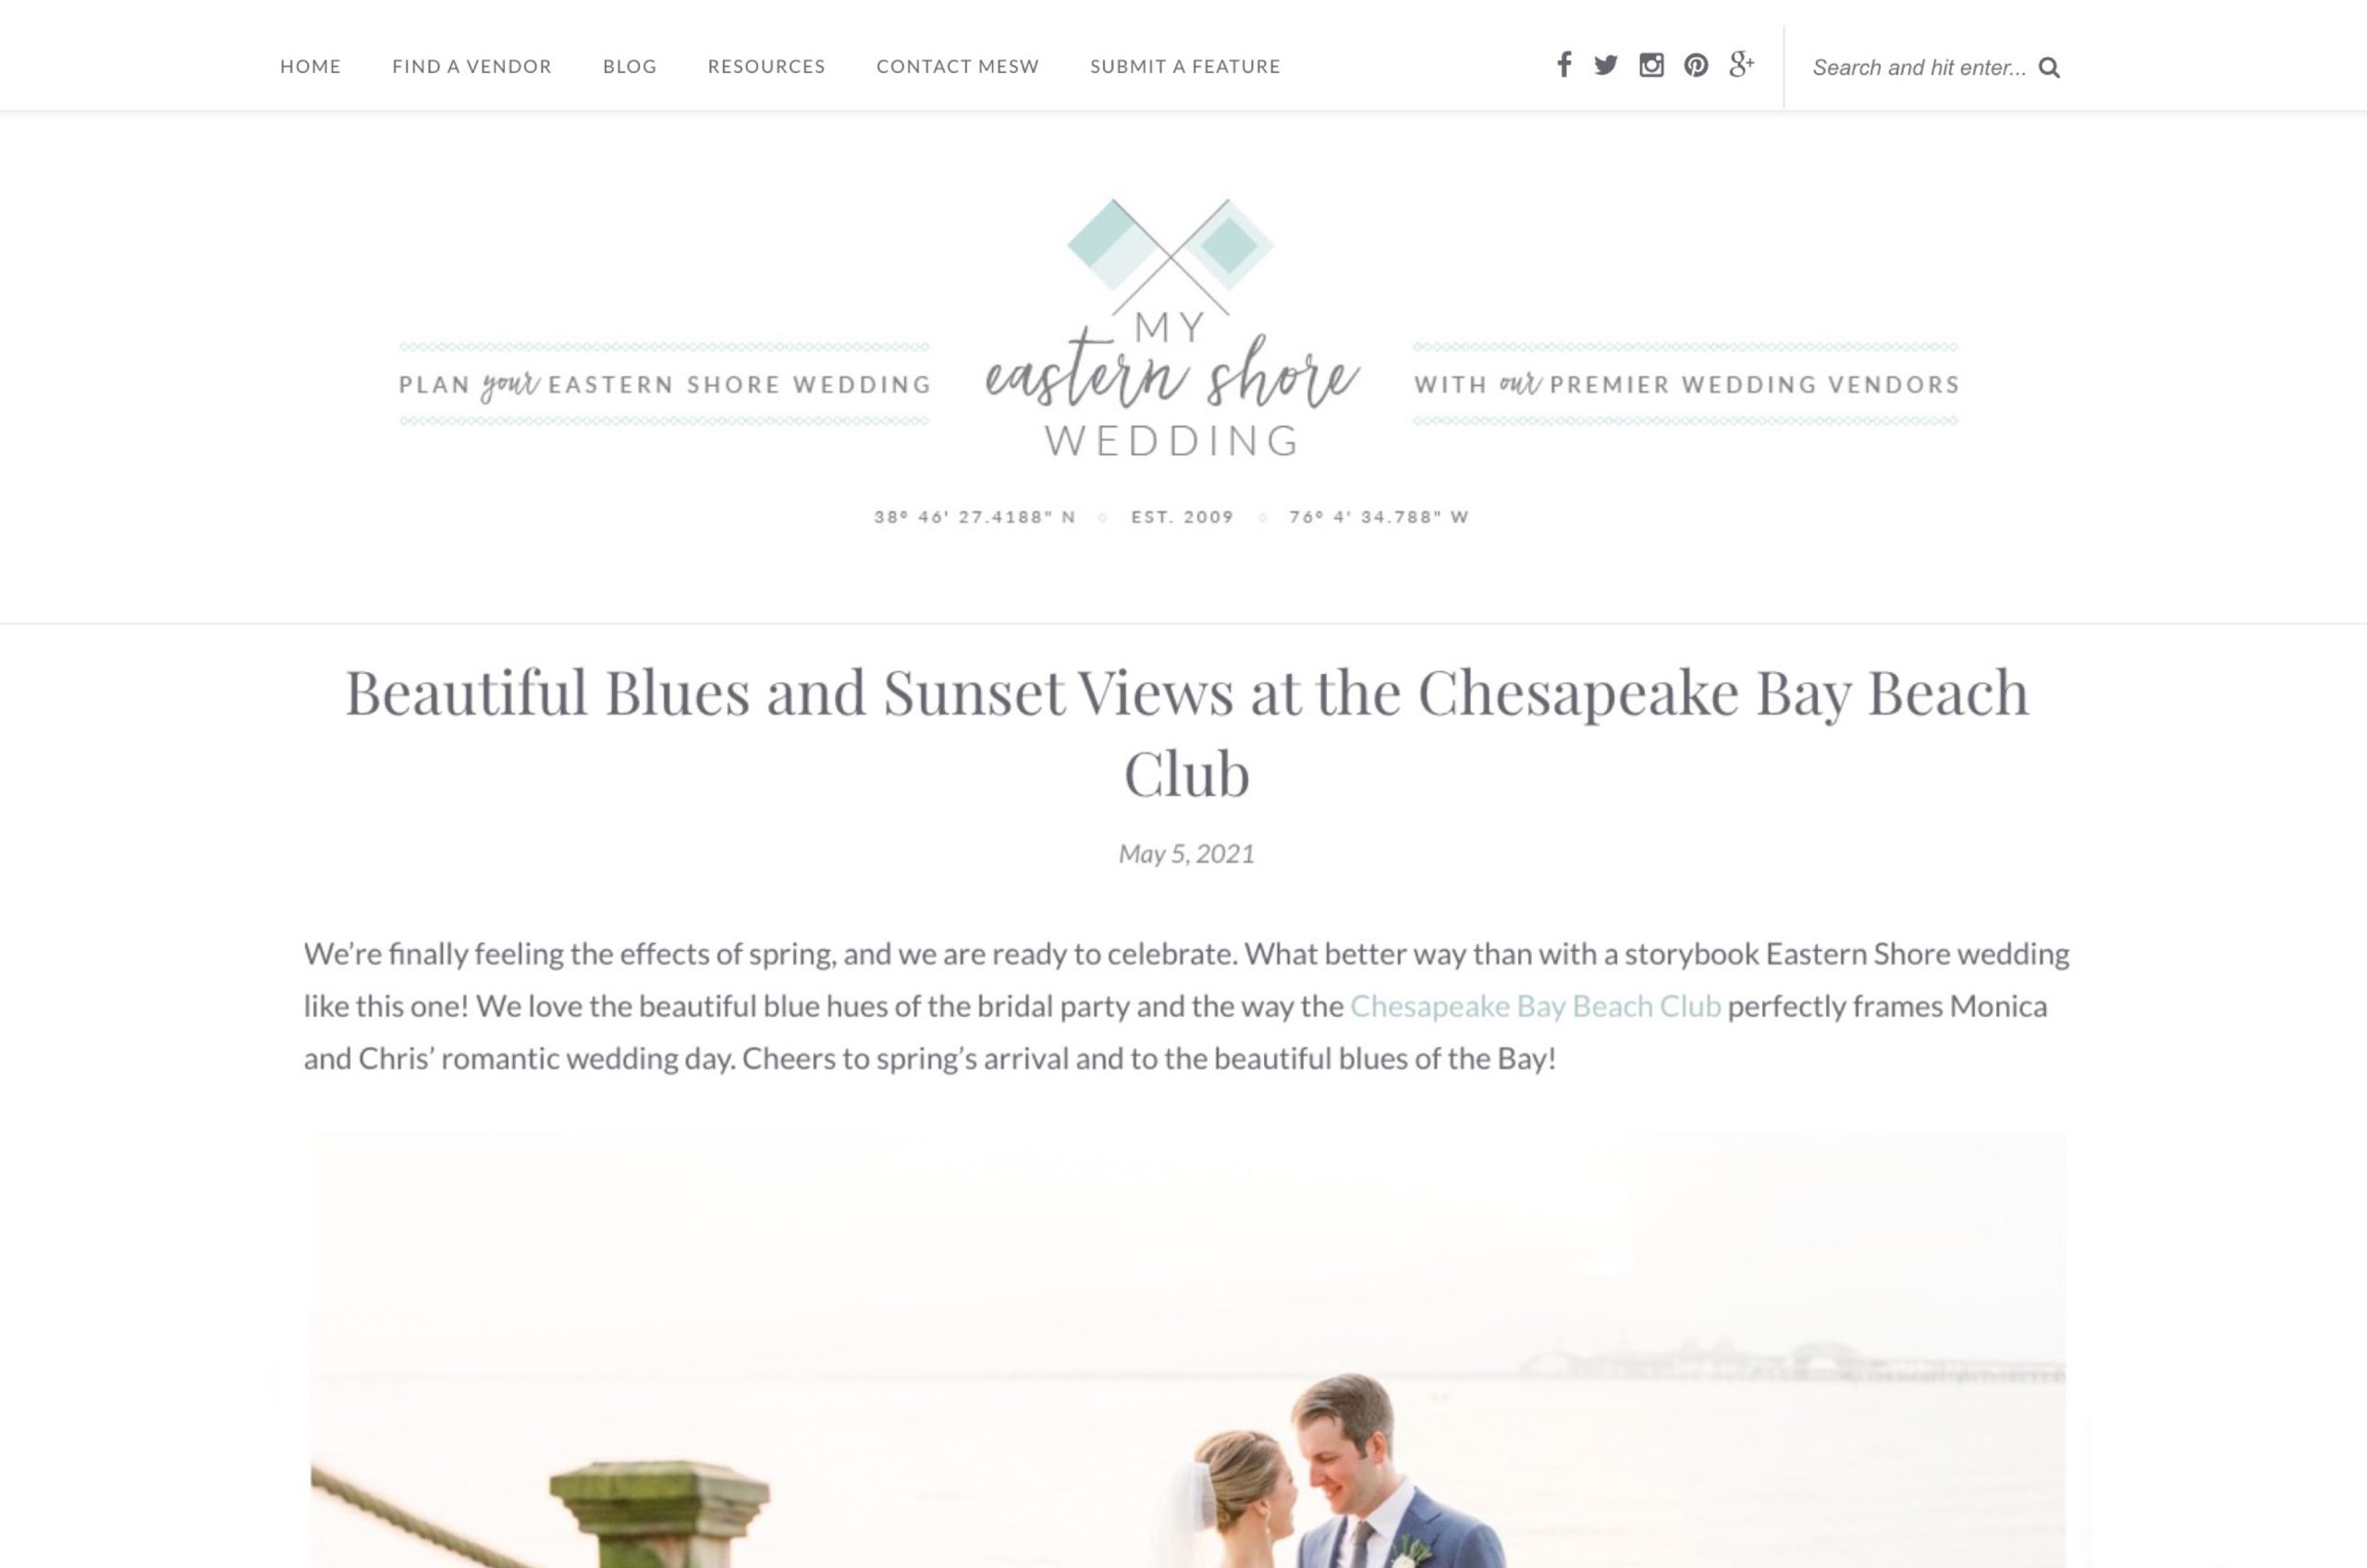 This spring Chesapeake Bay Beach Club wedding captured by Alicia Lacey is featured on the blog, My Eastern Shore Wedding.